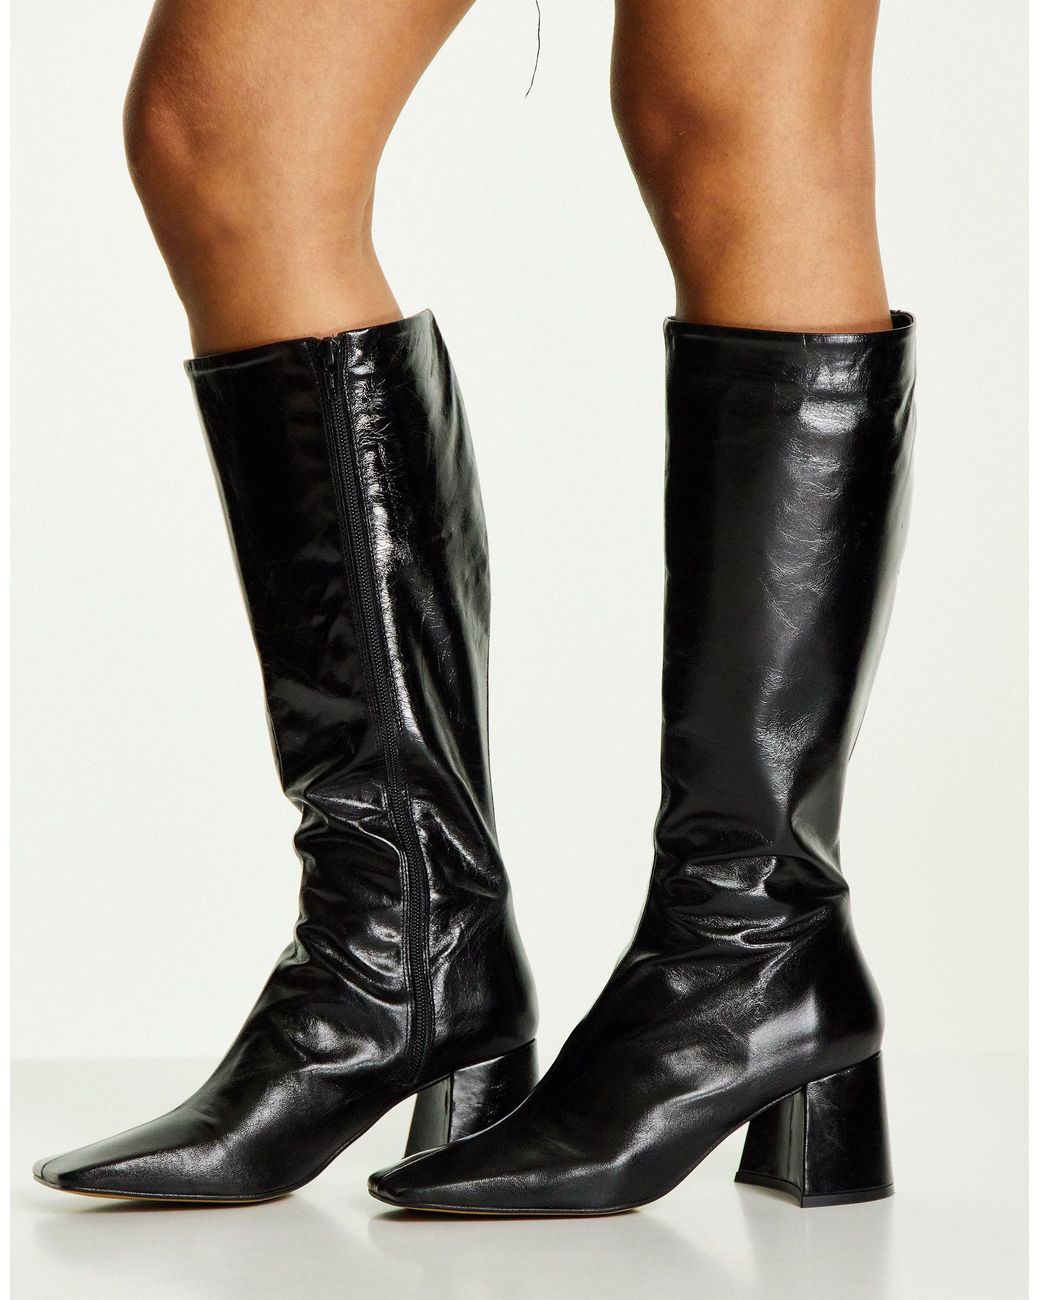 TOPSHOP Tula Leather Mid Knee High Boot in Black | Lyst